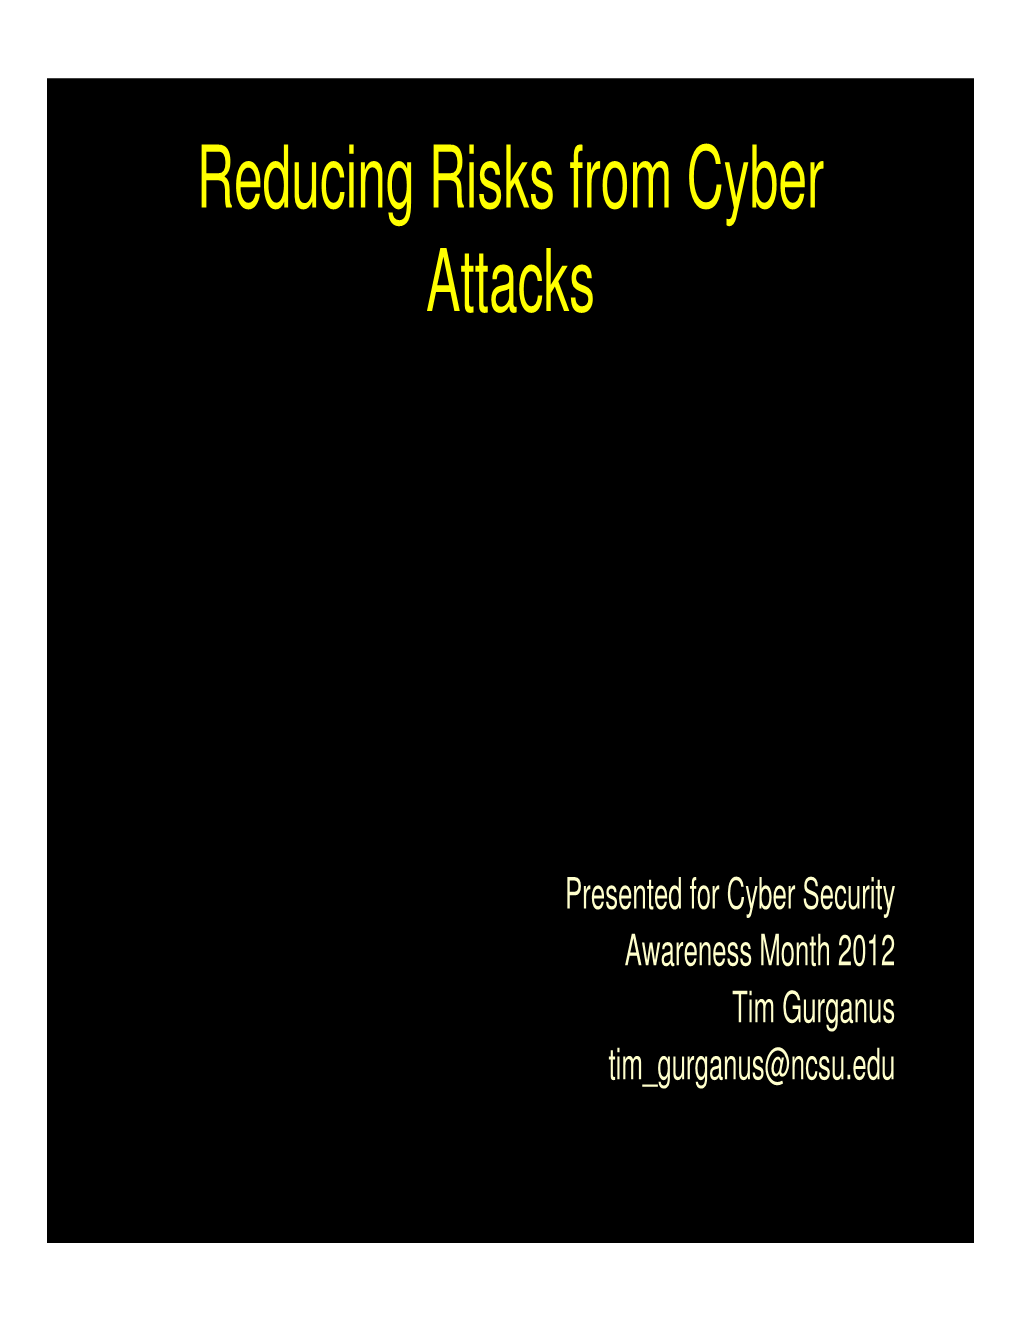 Reducing Risks from Cyber Attacks